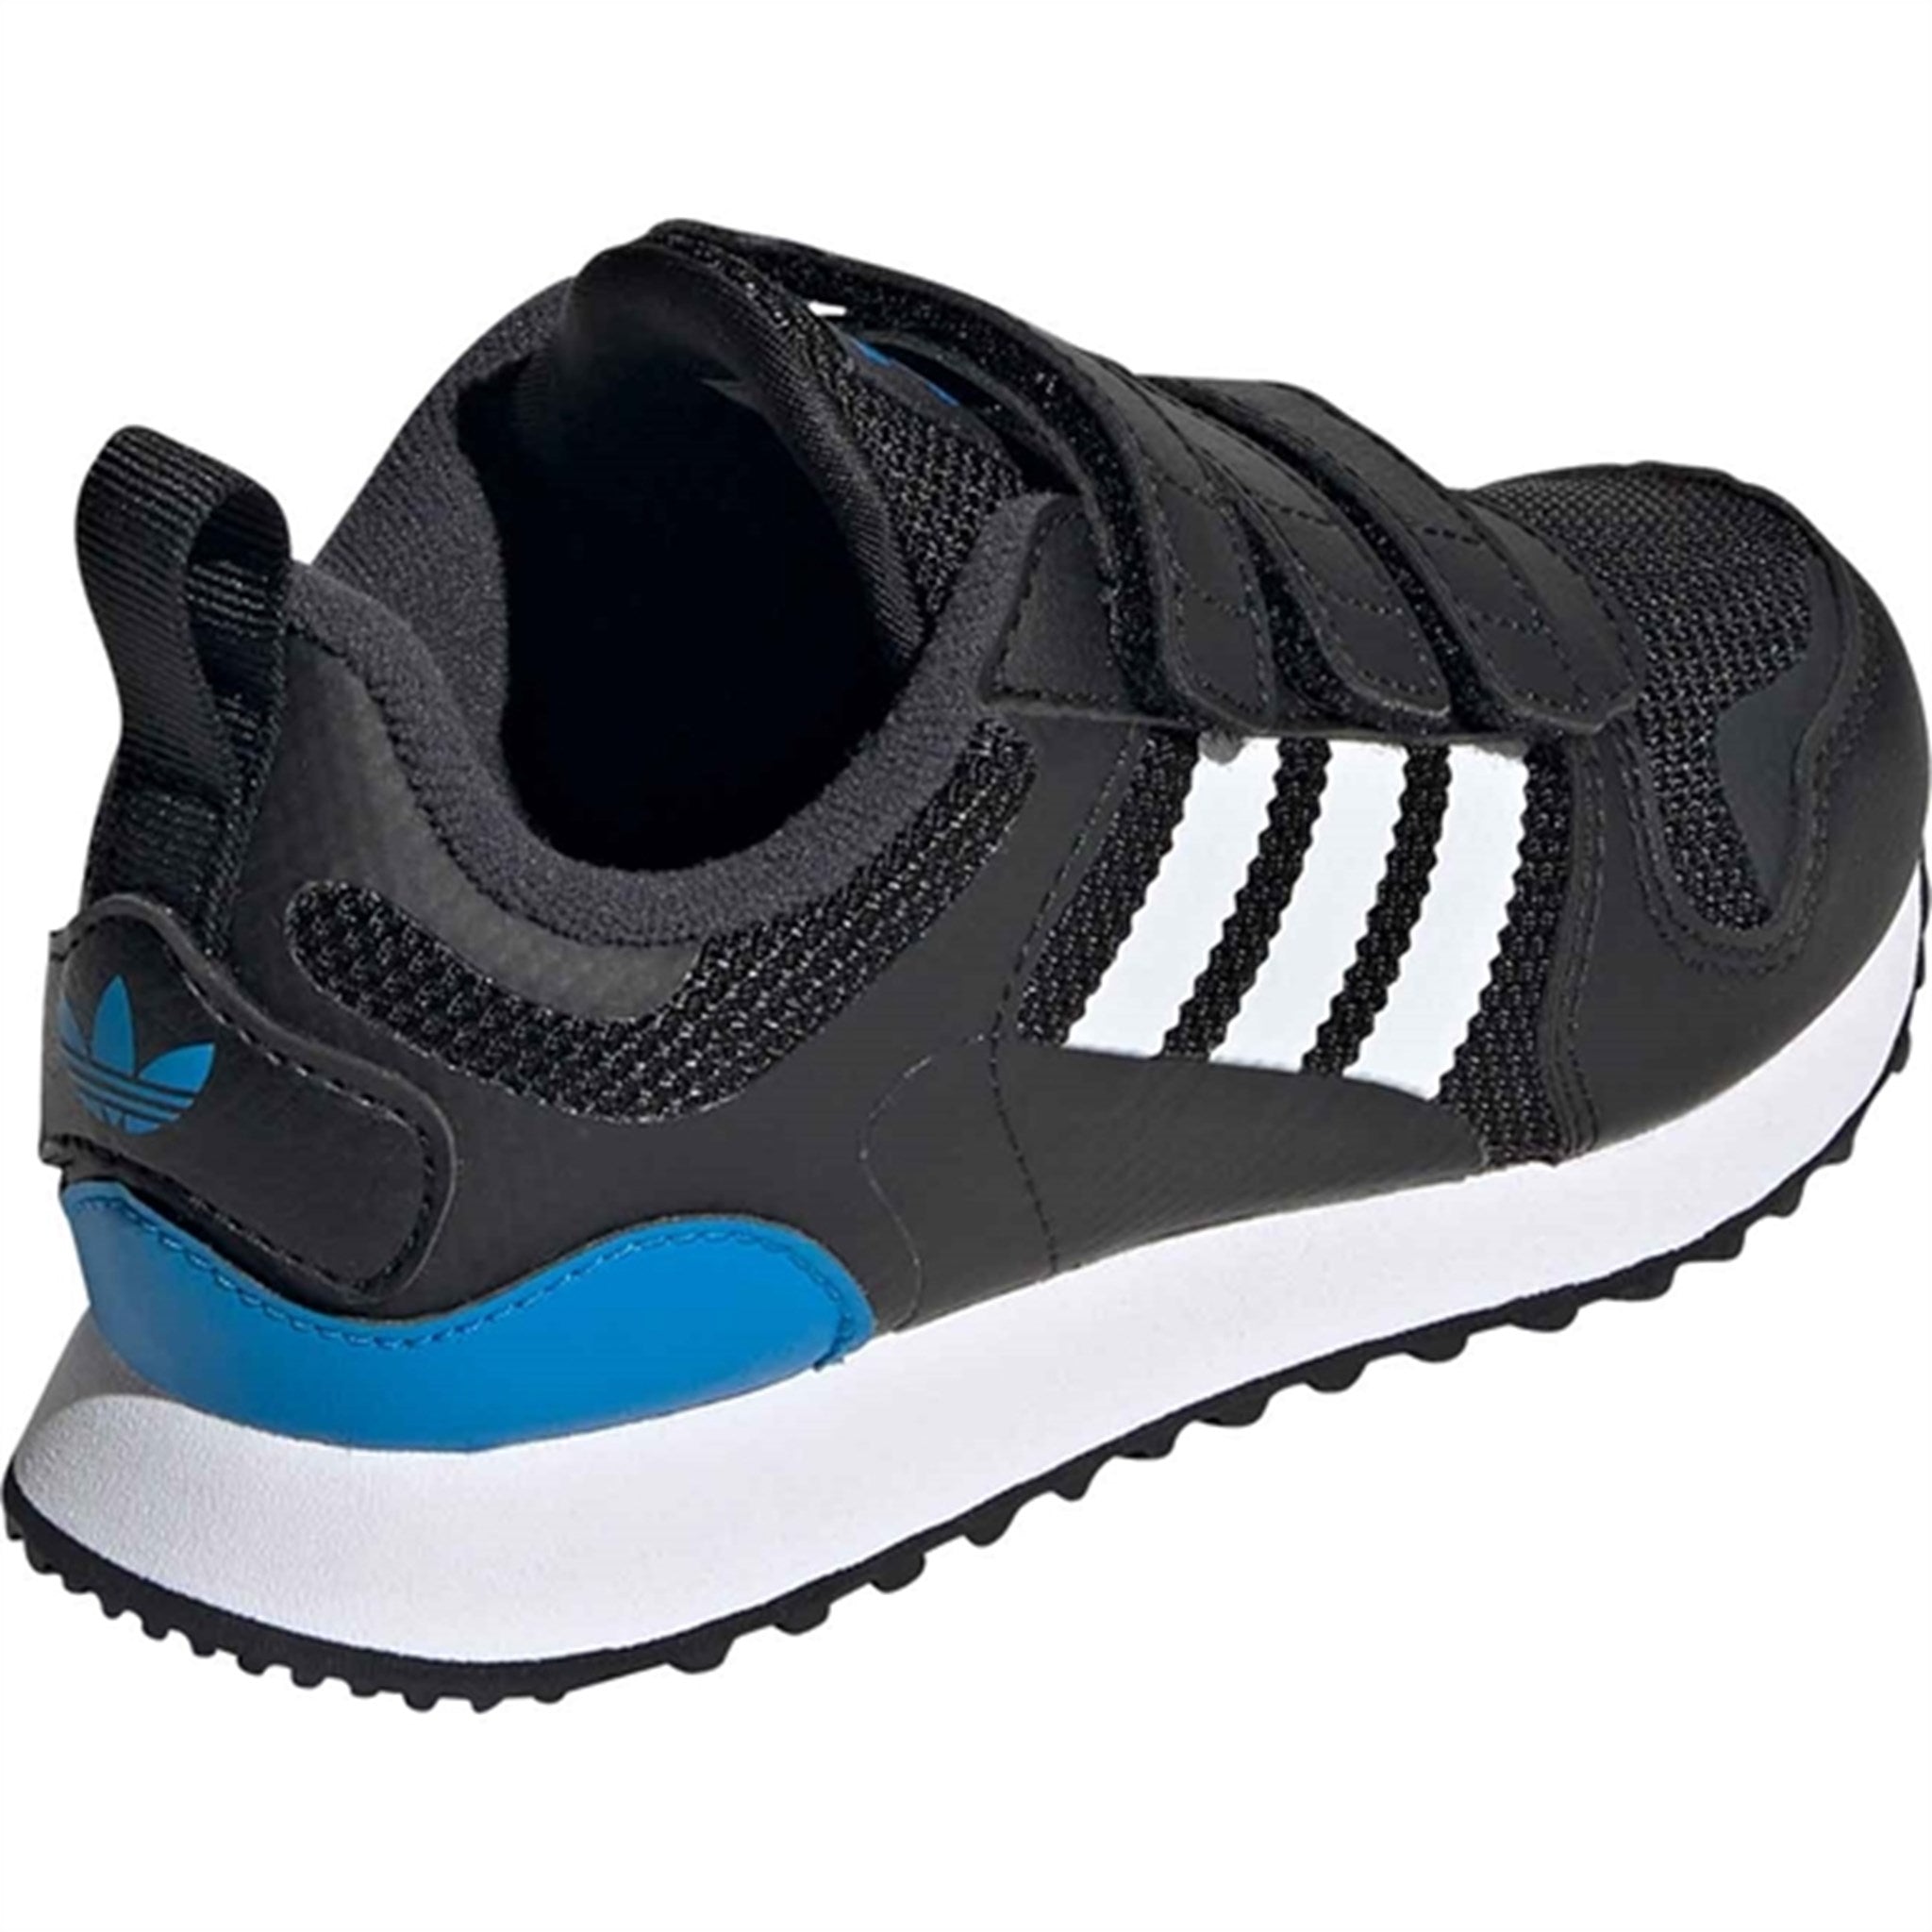 adidas ZX 700 HD Sneakers Black White Carbon 4